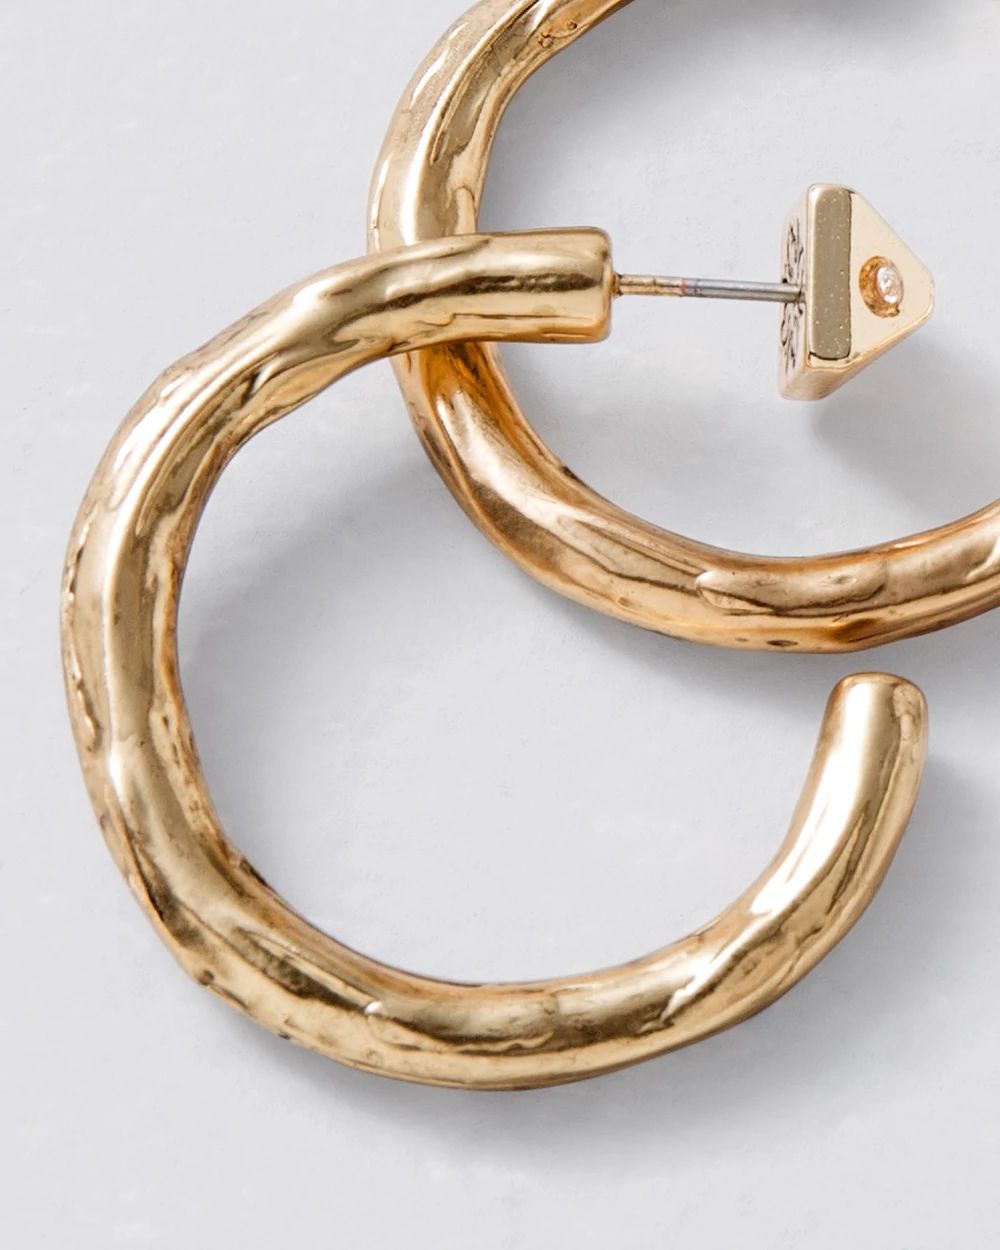 Small Goldtone Hoop Earrings click to view larger image.